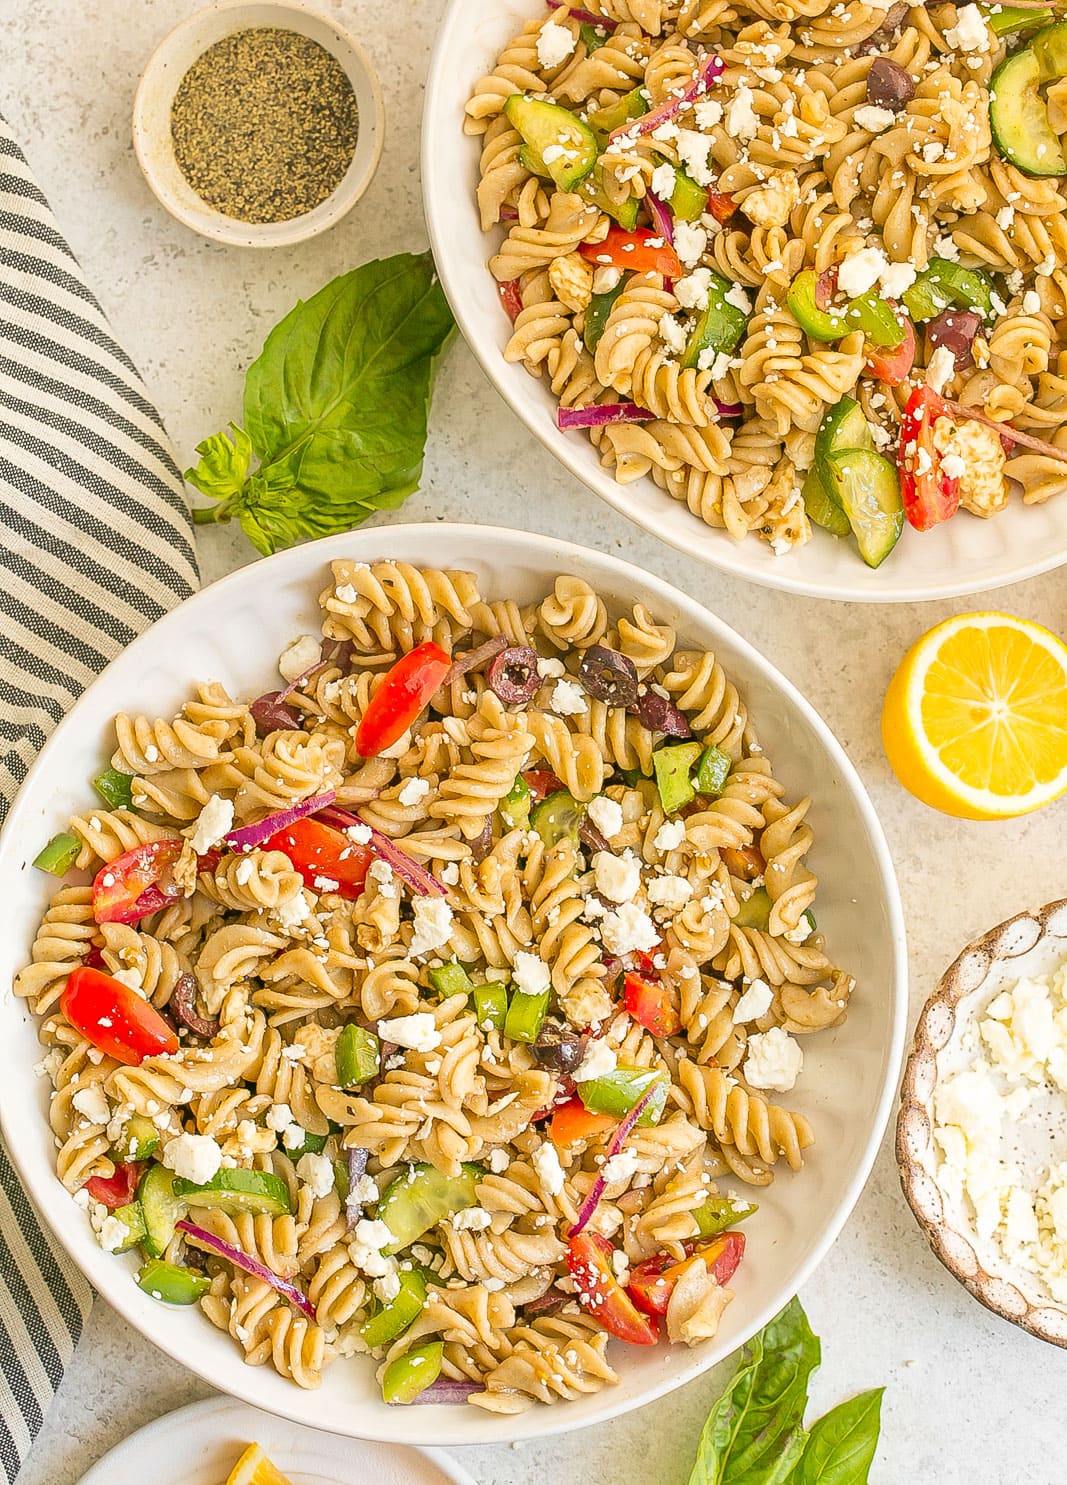 Two bowls filled with pasta salad.